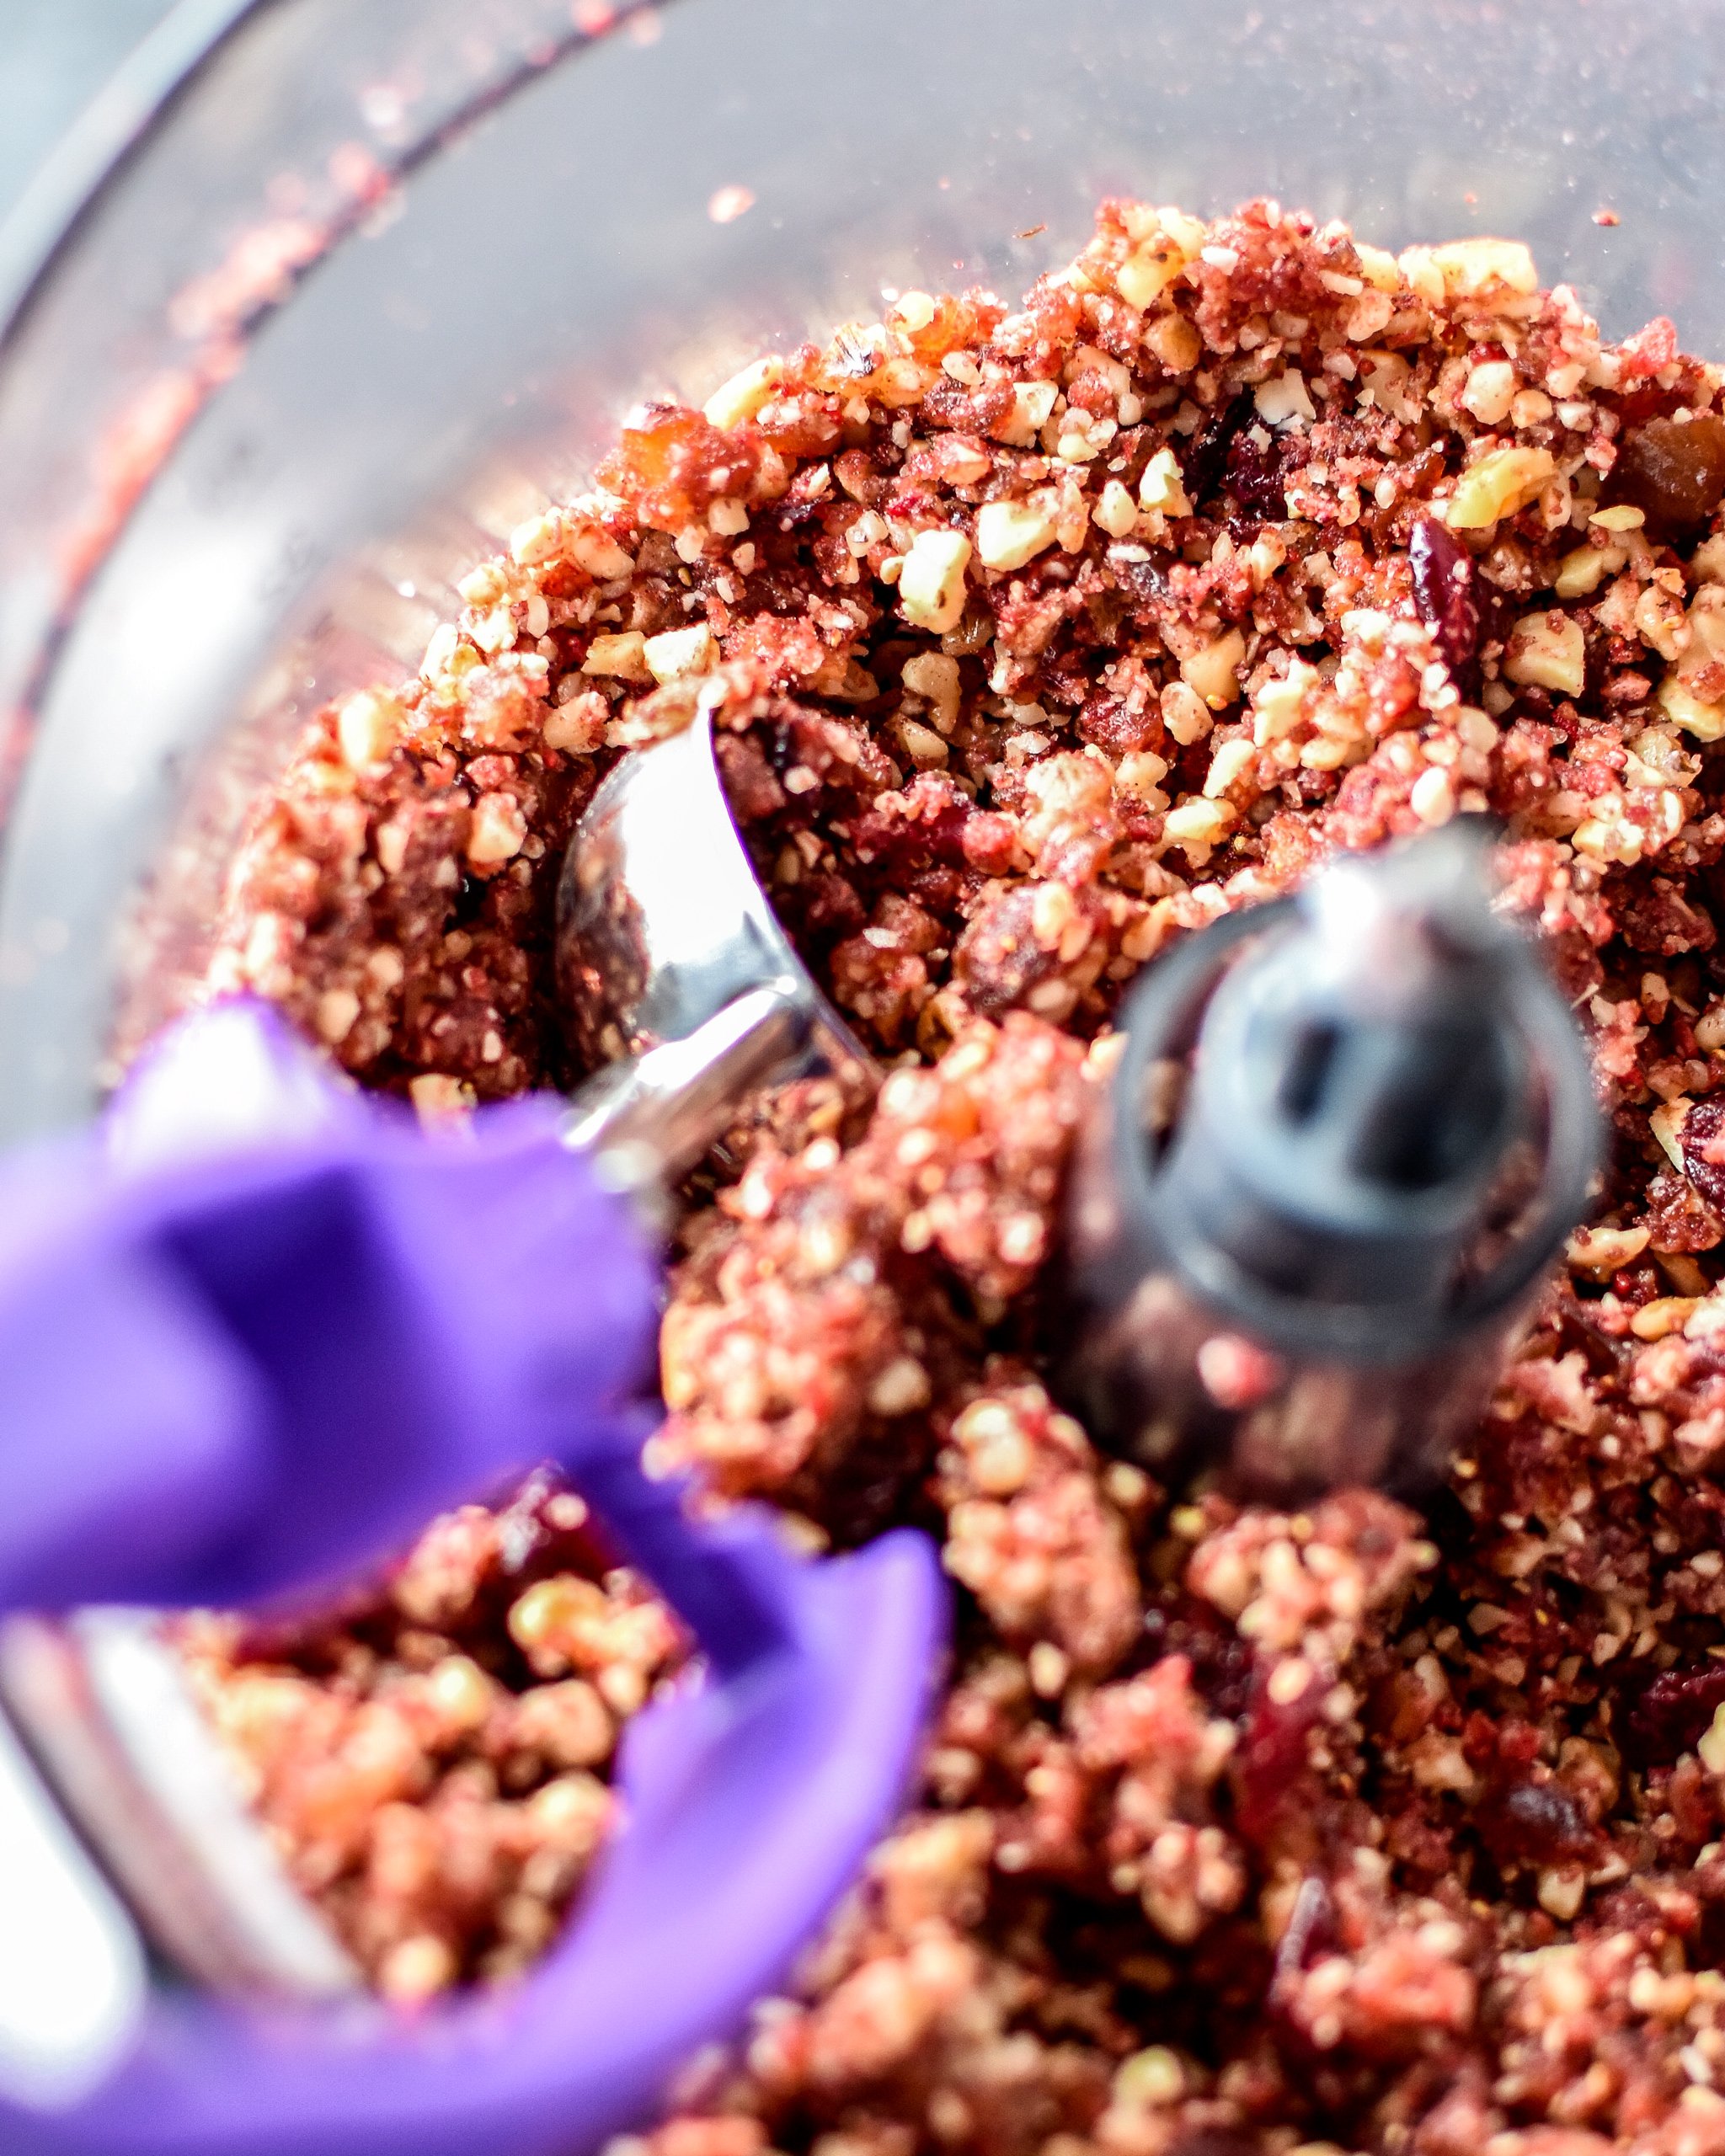 The Spiced Berry Bliss Ball mixture after being processed in the food processor.